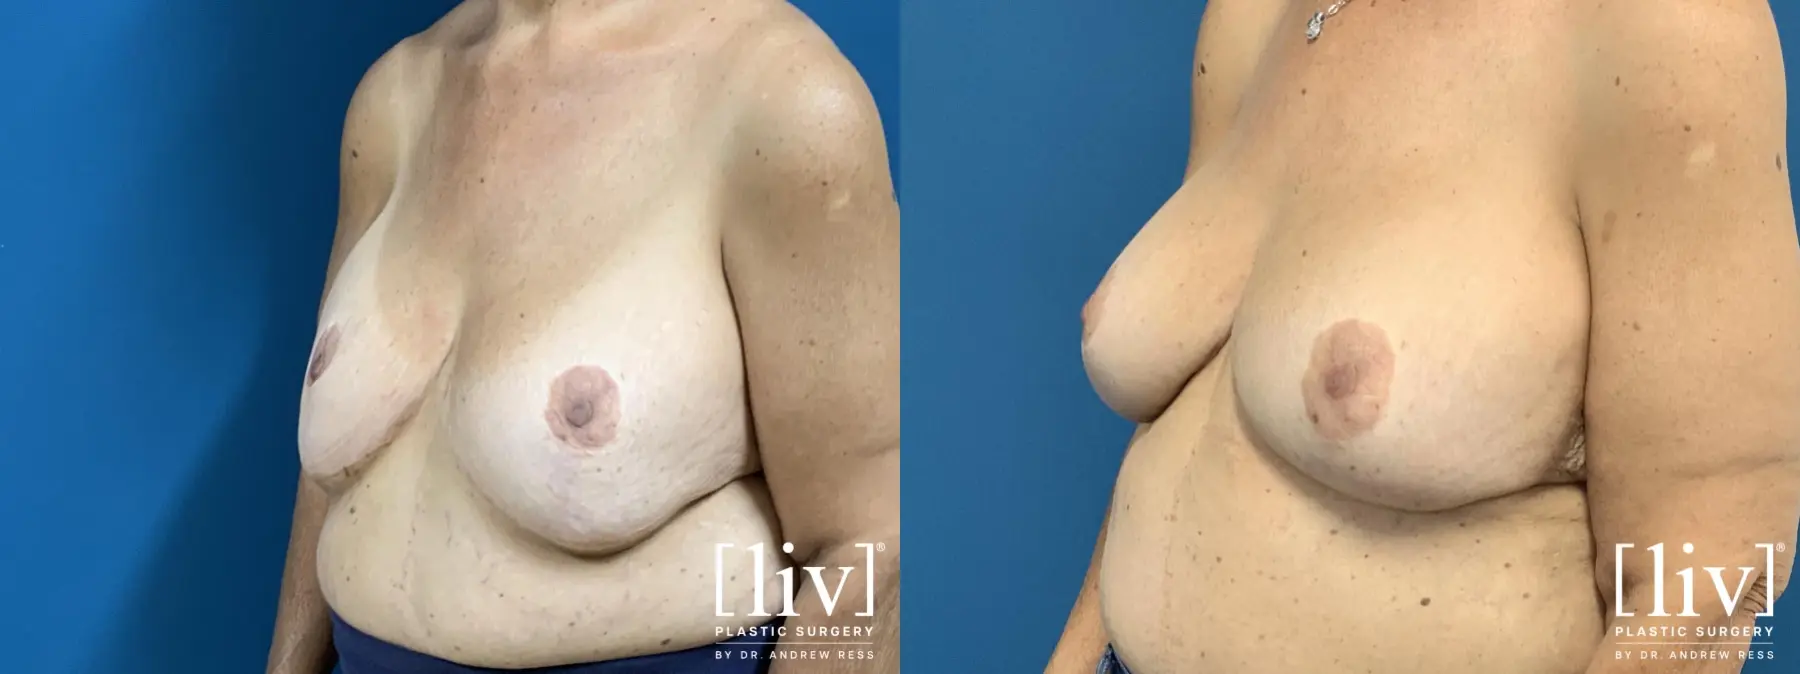 Breast Implant Exchange and Repositioning - Before and After 2